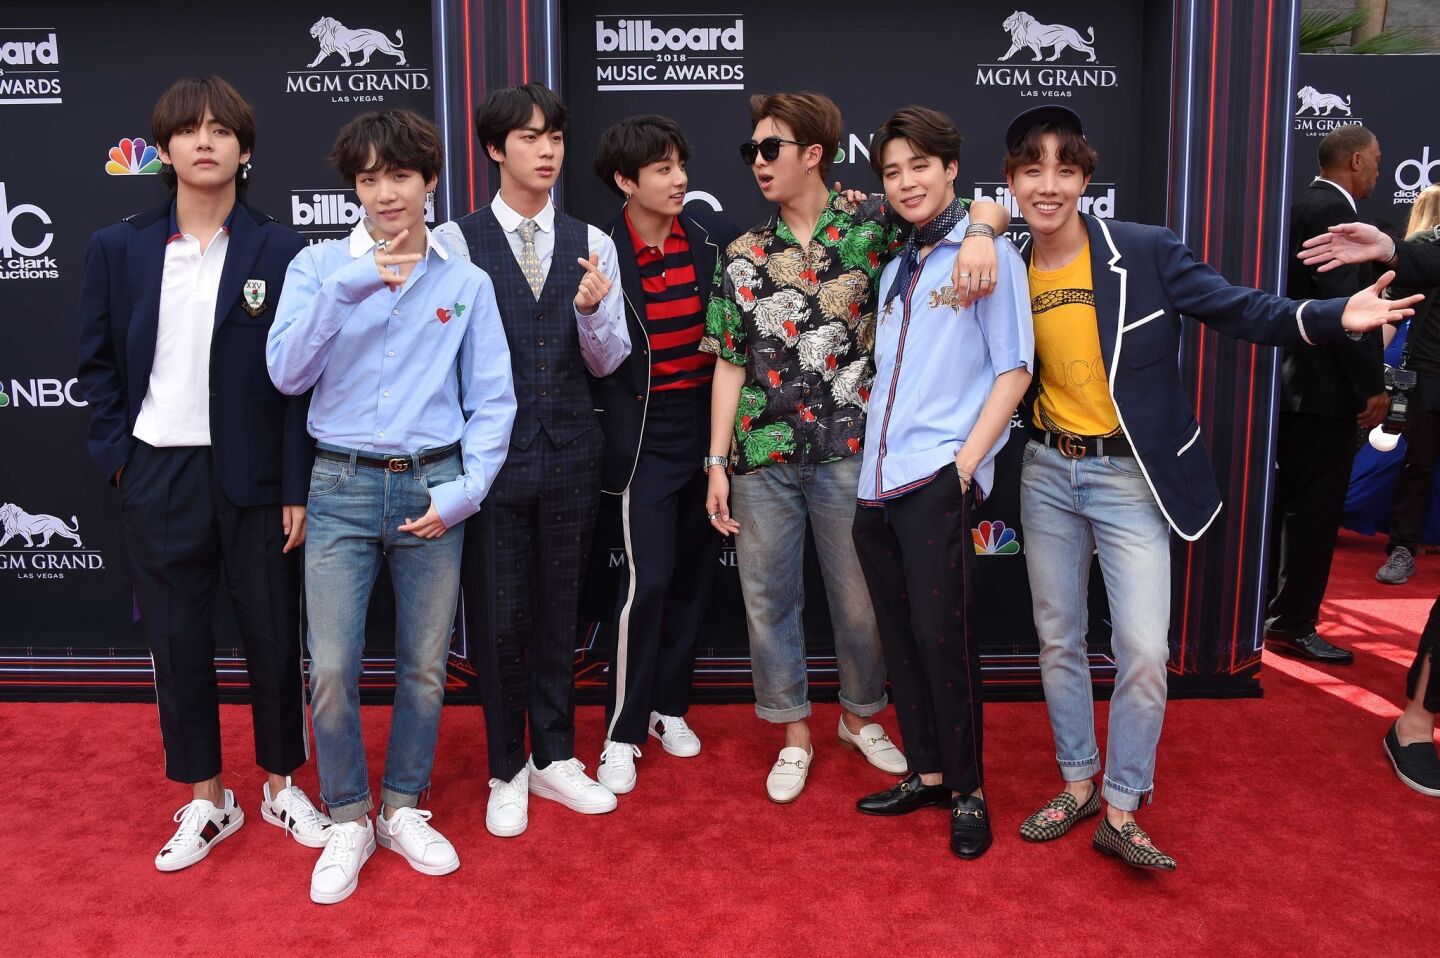 Boy band BTS attends the 2018 Billboard Music Awards 2018 at the MGM Grand Resort International in Las Vegas.